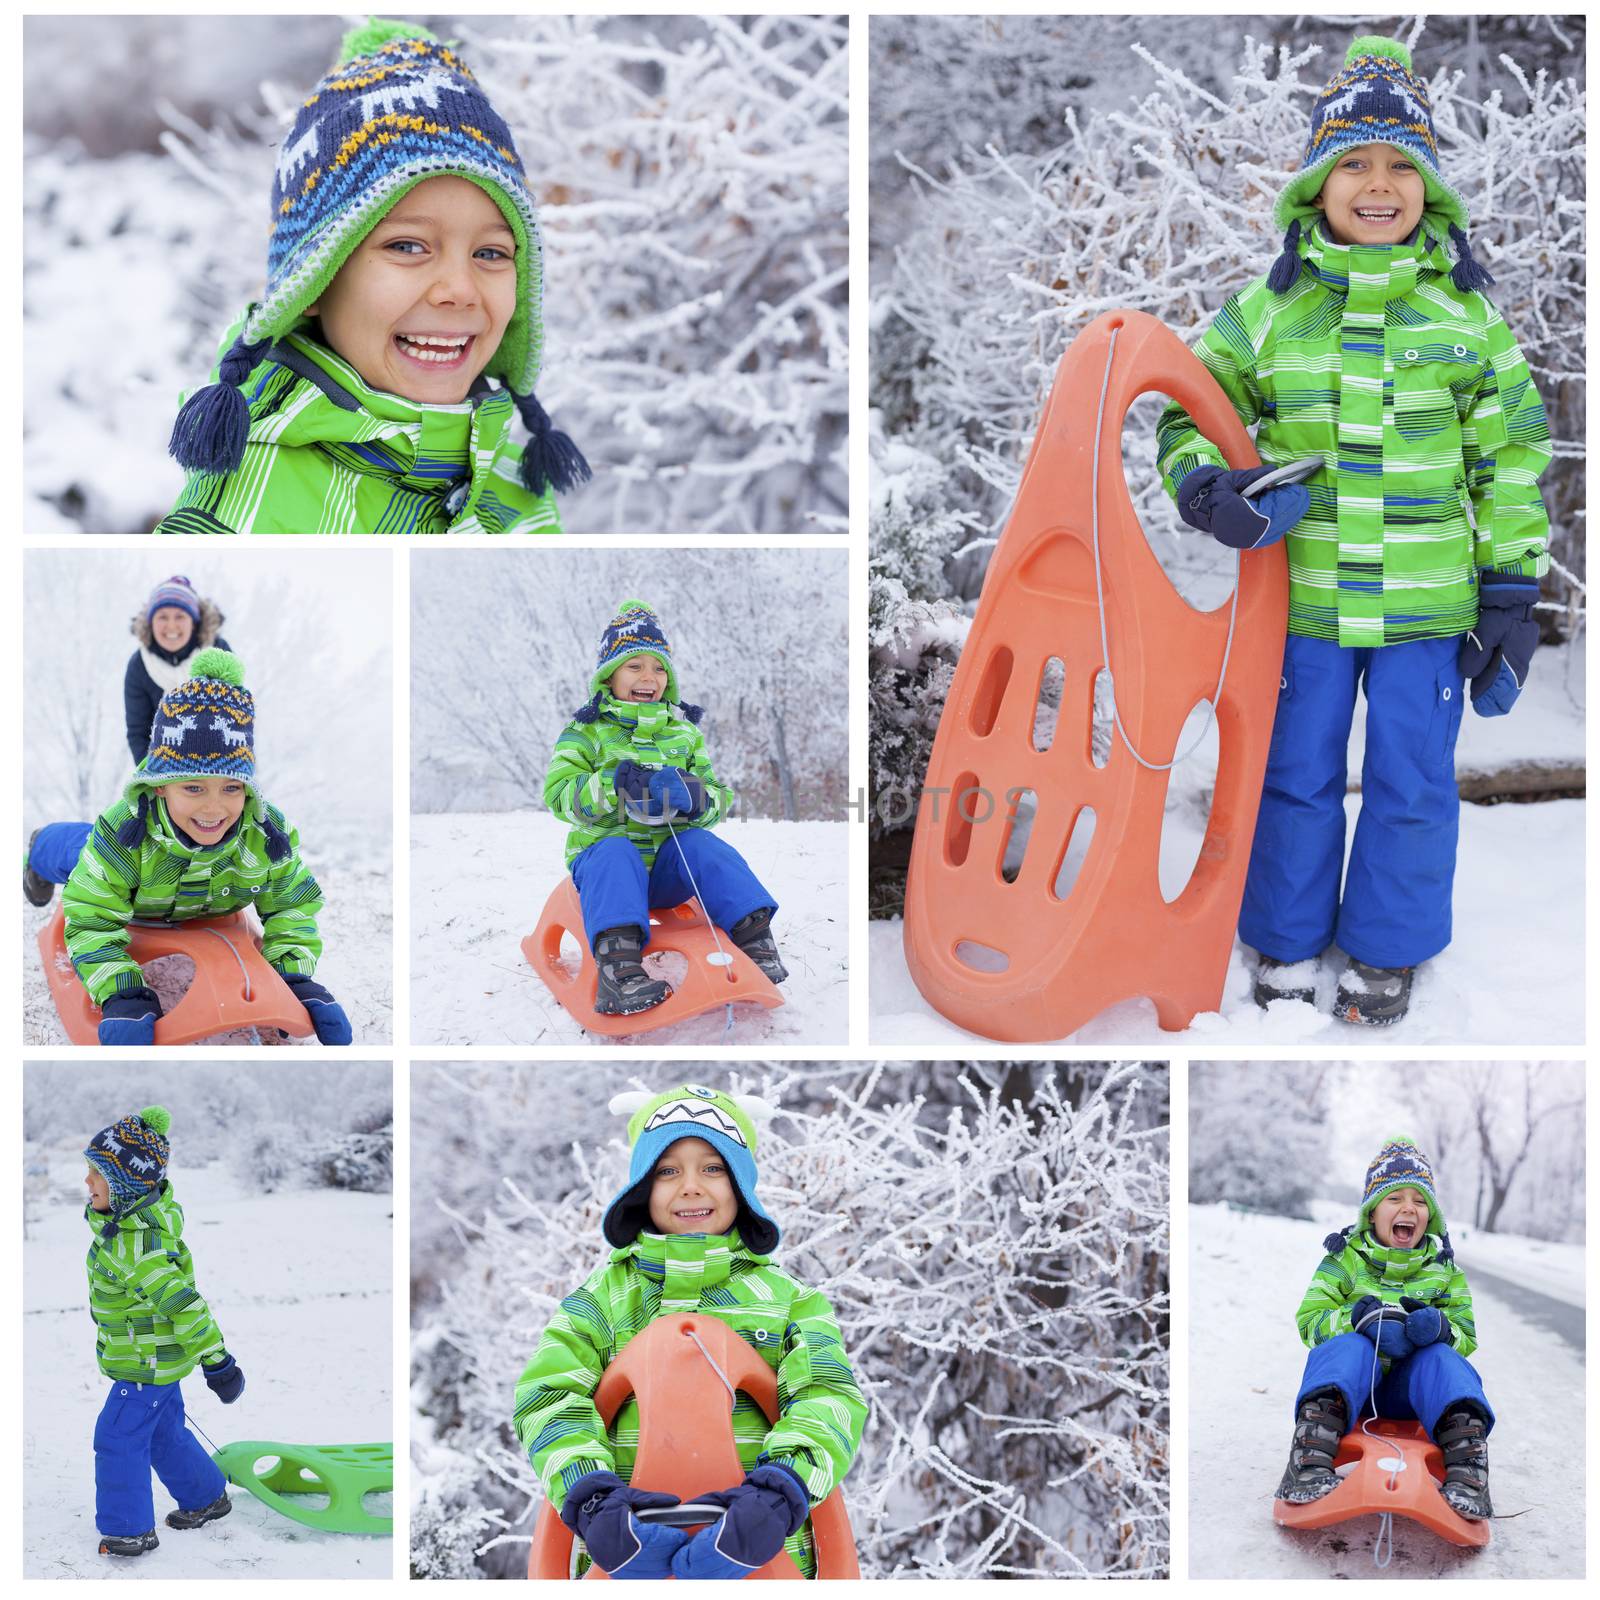 Winter, play, fun - Collage of images cute little boy having fun with sled in winter park